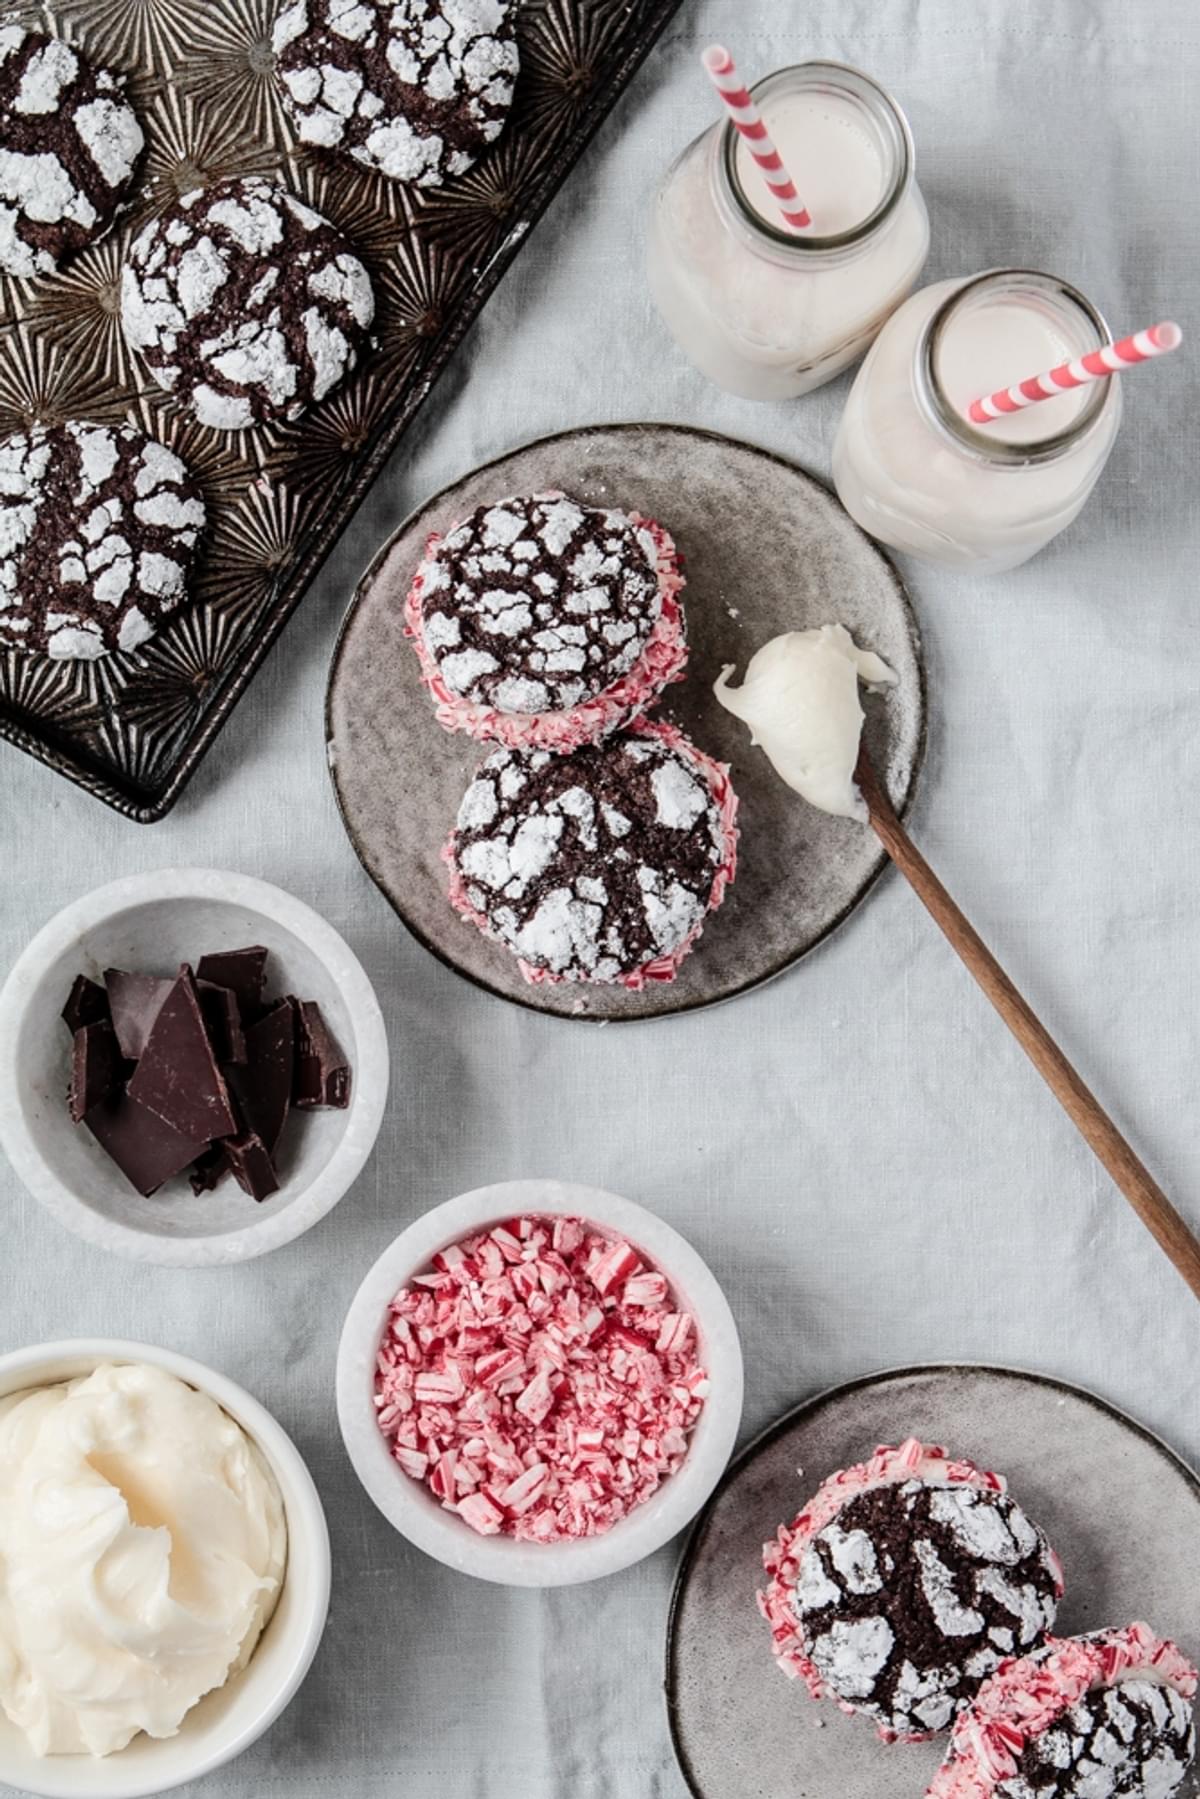 Crinkle Cookies With Peppermint Cream on a plate with chocolate, frosting, and two glasses of milk